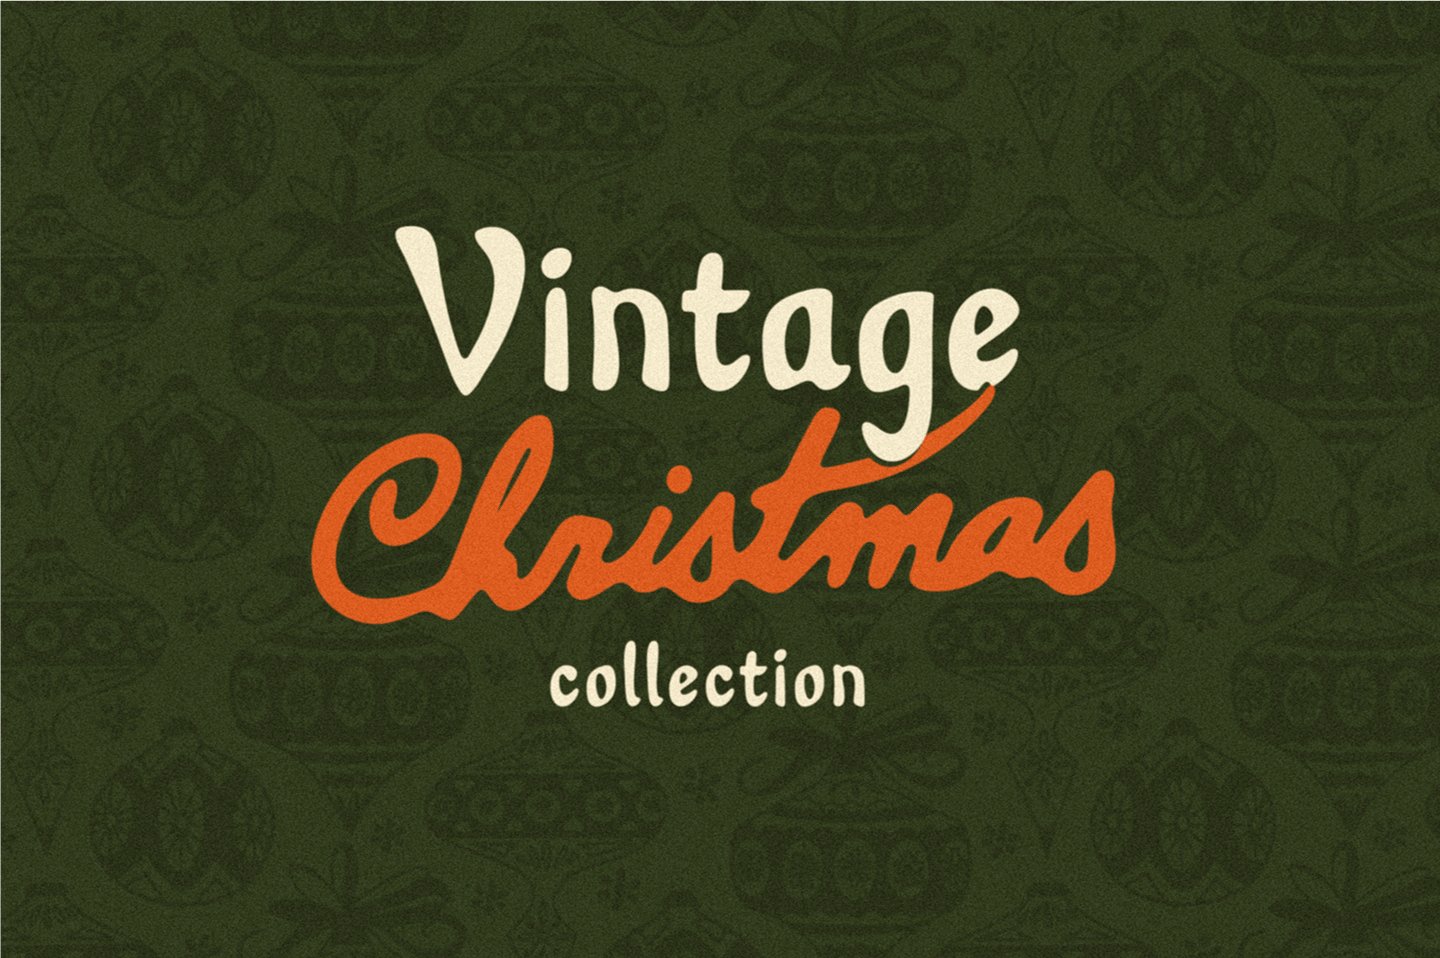 Vintage Christmas Collection: 3-in-1 cover image.